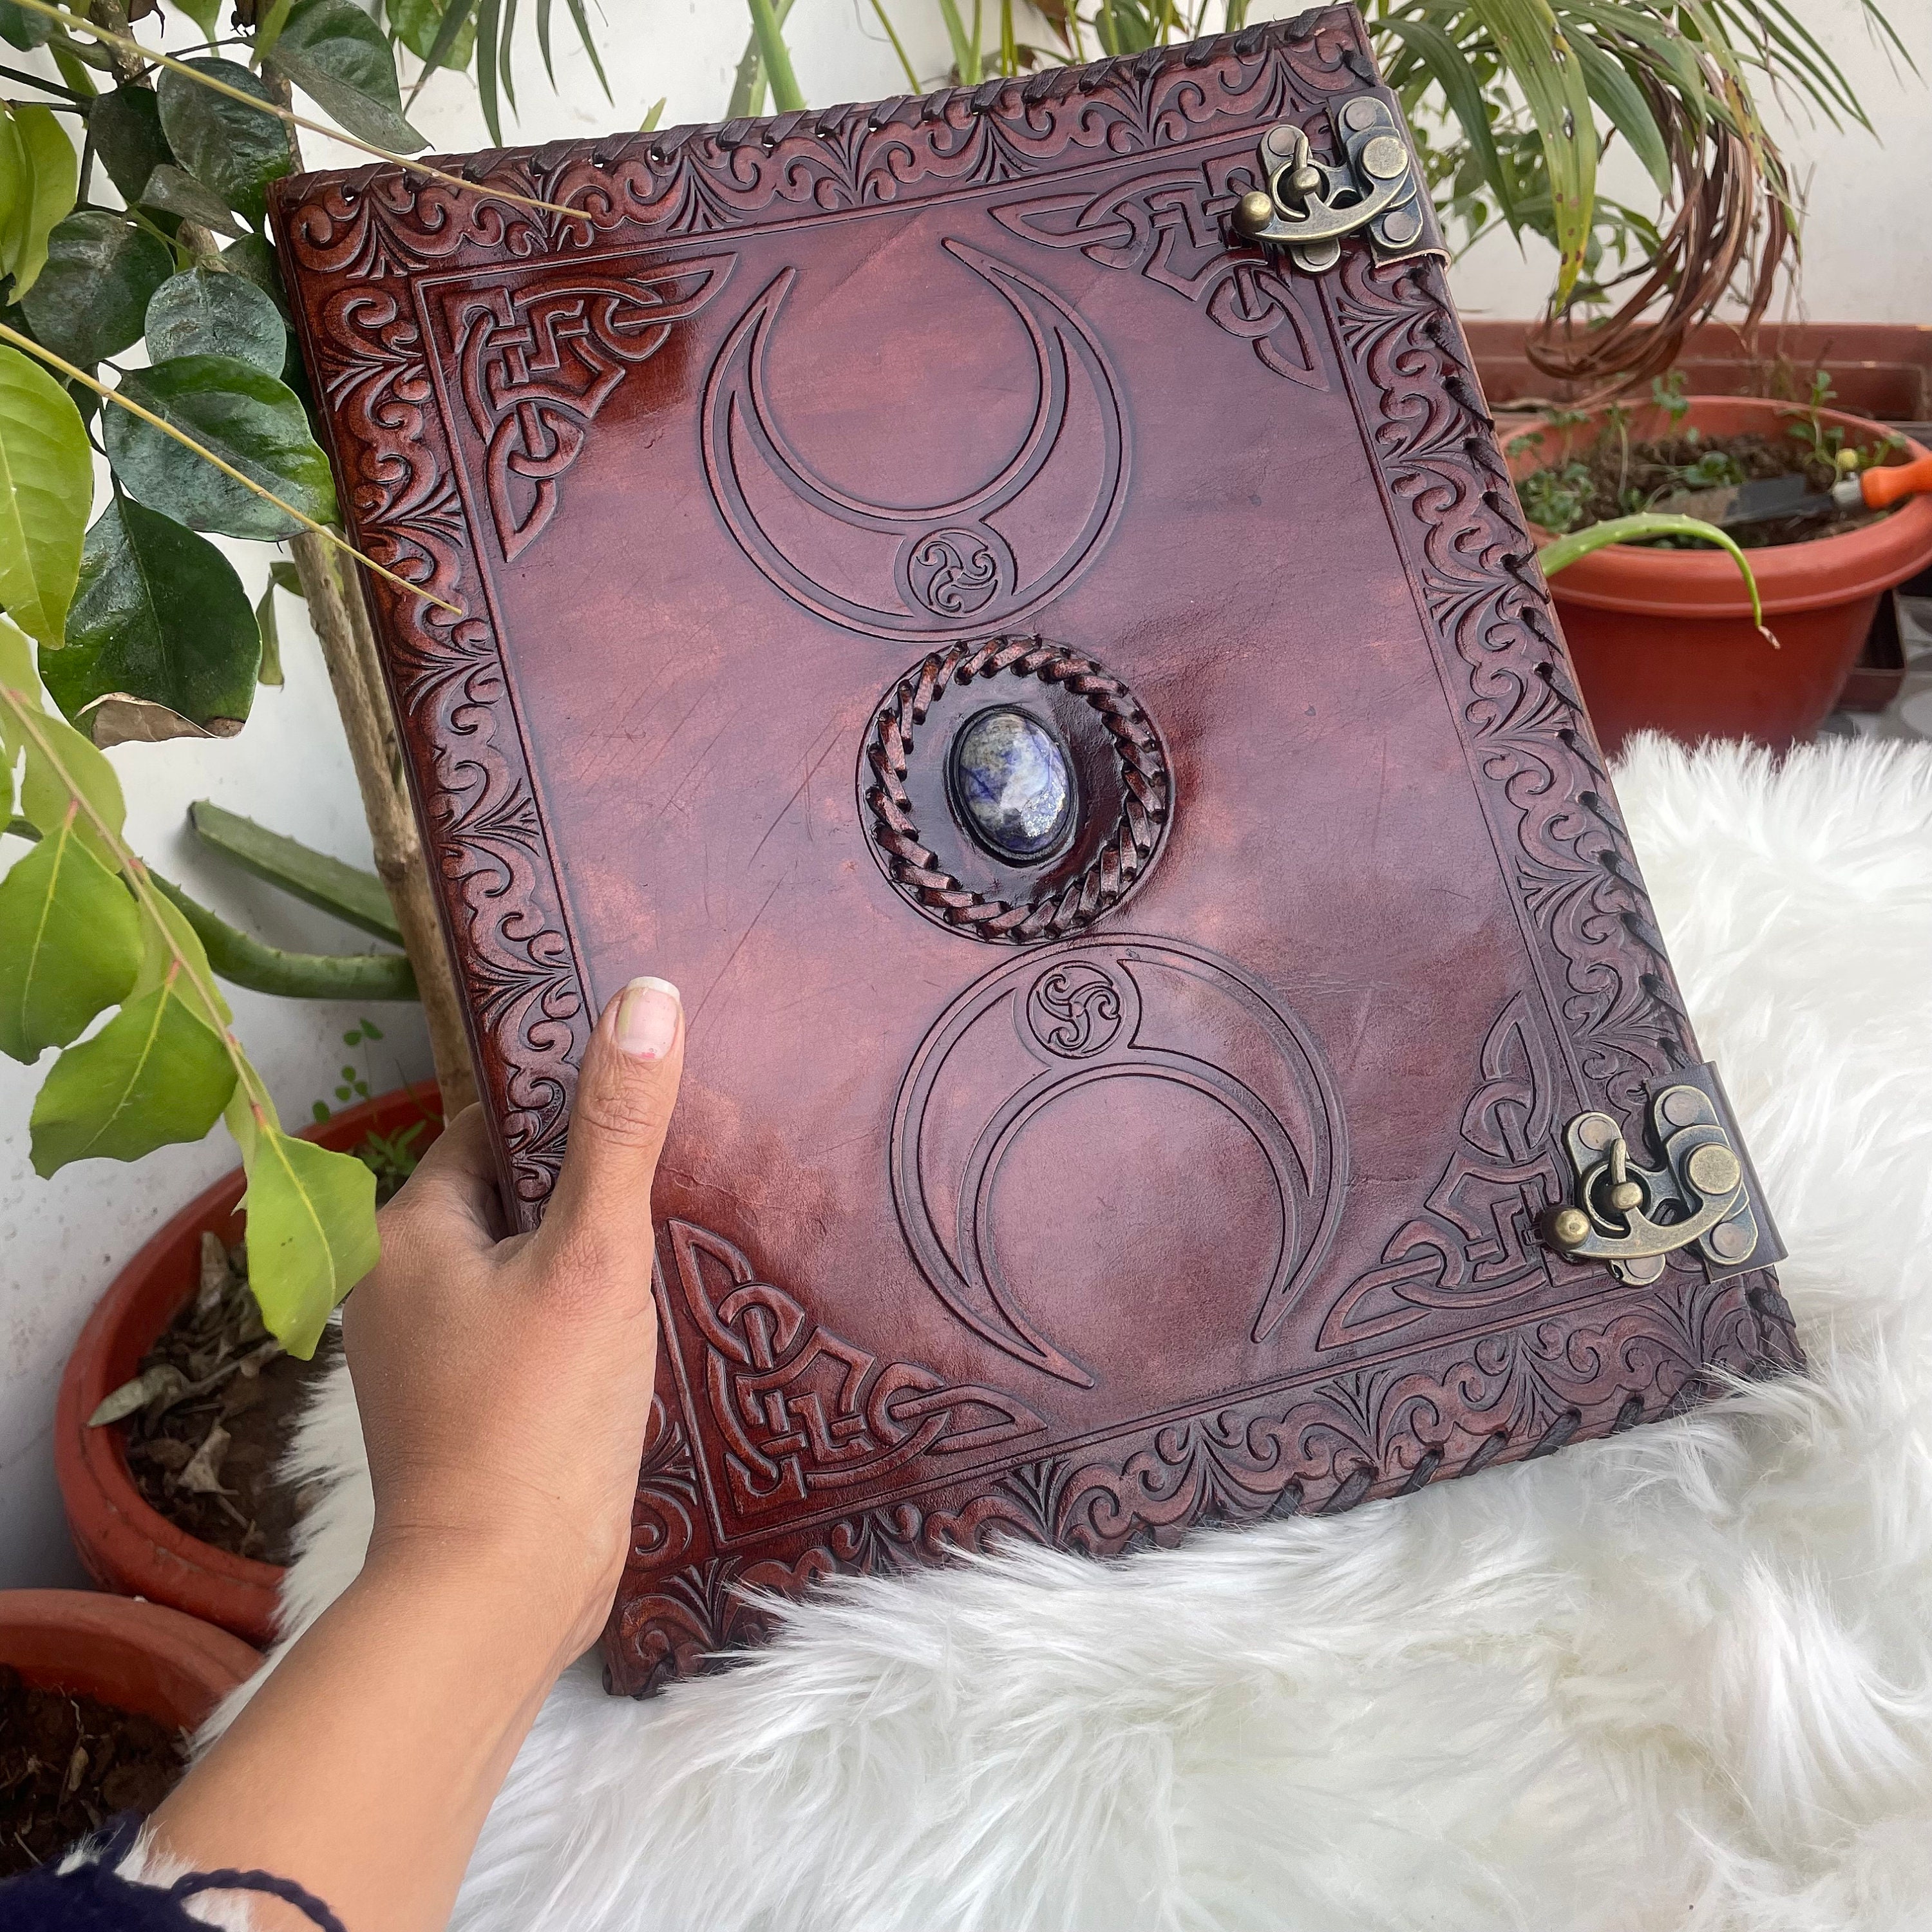 SPELL BOOK COVER Old Witchcraft Printable Cover for Grimoire 